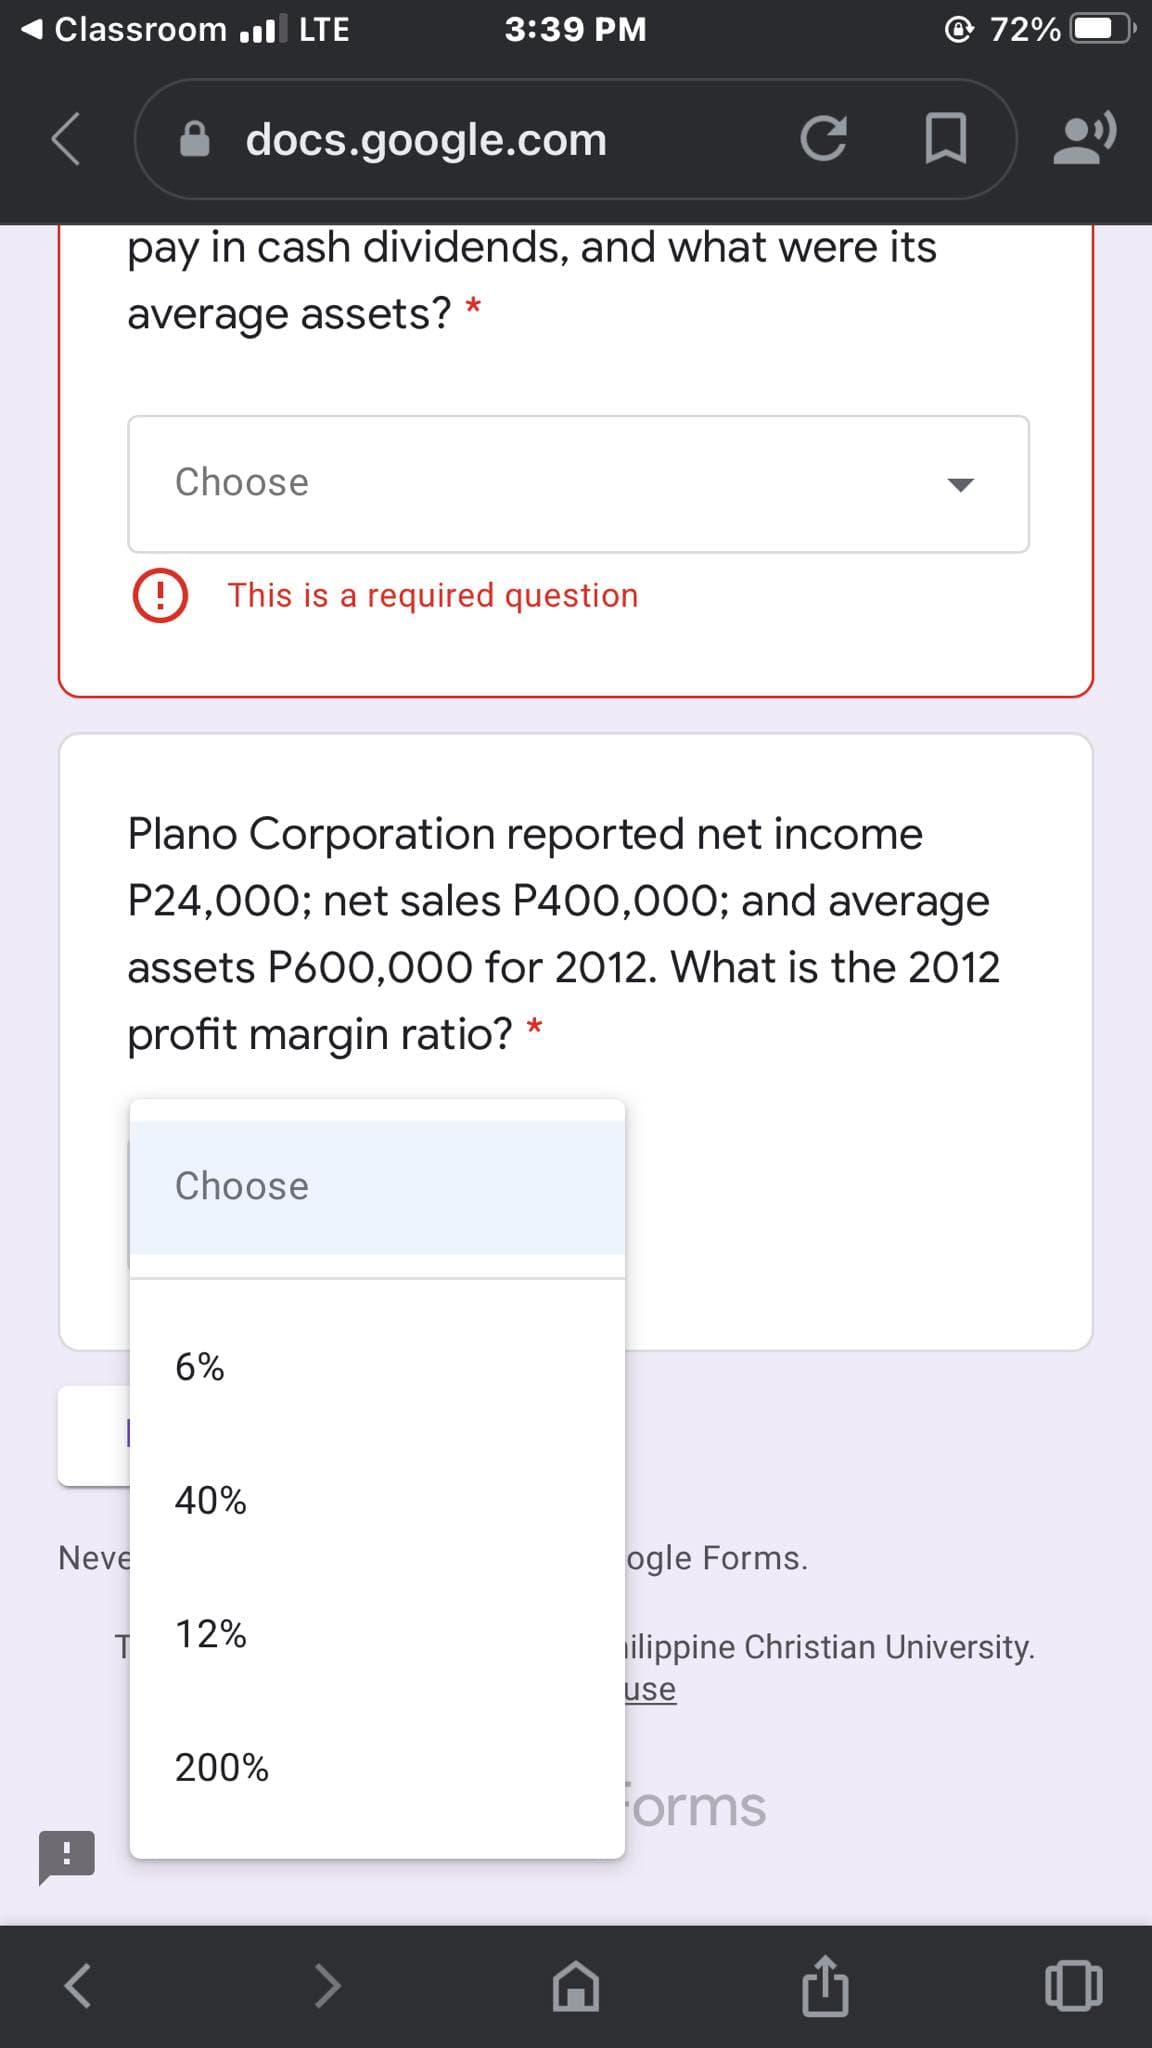 Classroom l LTE
3:39 PM
72%
docs.google.com
pay in cash dividends, and what were its
average assets? *
Choose
This is a required question
Plano Corporation reported net income
P24,000; net sales P400,000; and average
assets P600,000 for 2012. What is the 2012
profit margin ratio? *
Choose
6%
40%
Neve
ogle Forms.
12%
ilippine Christian University.
use
200%
orms
